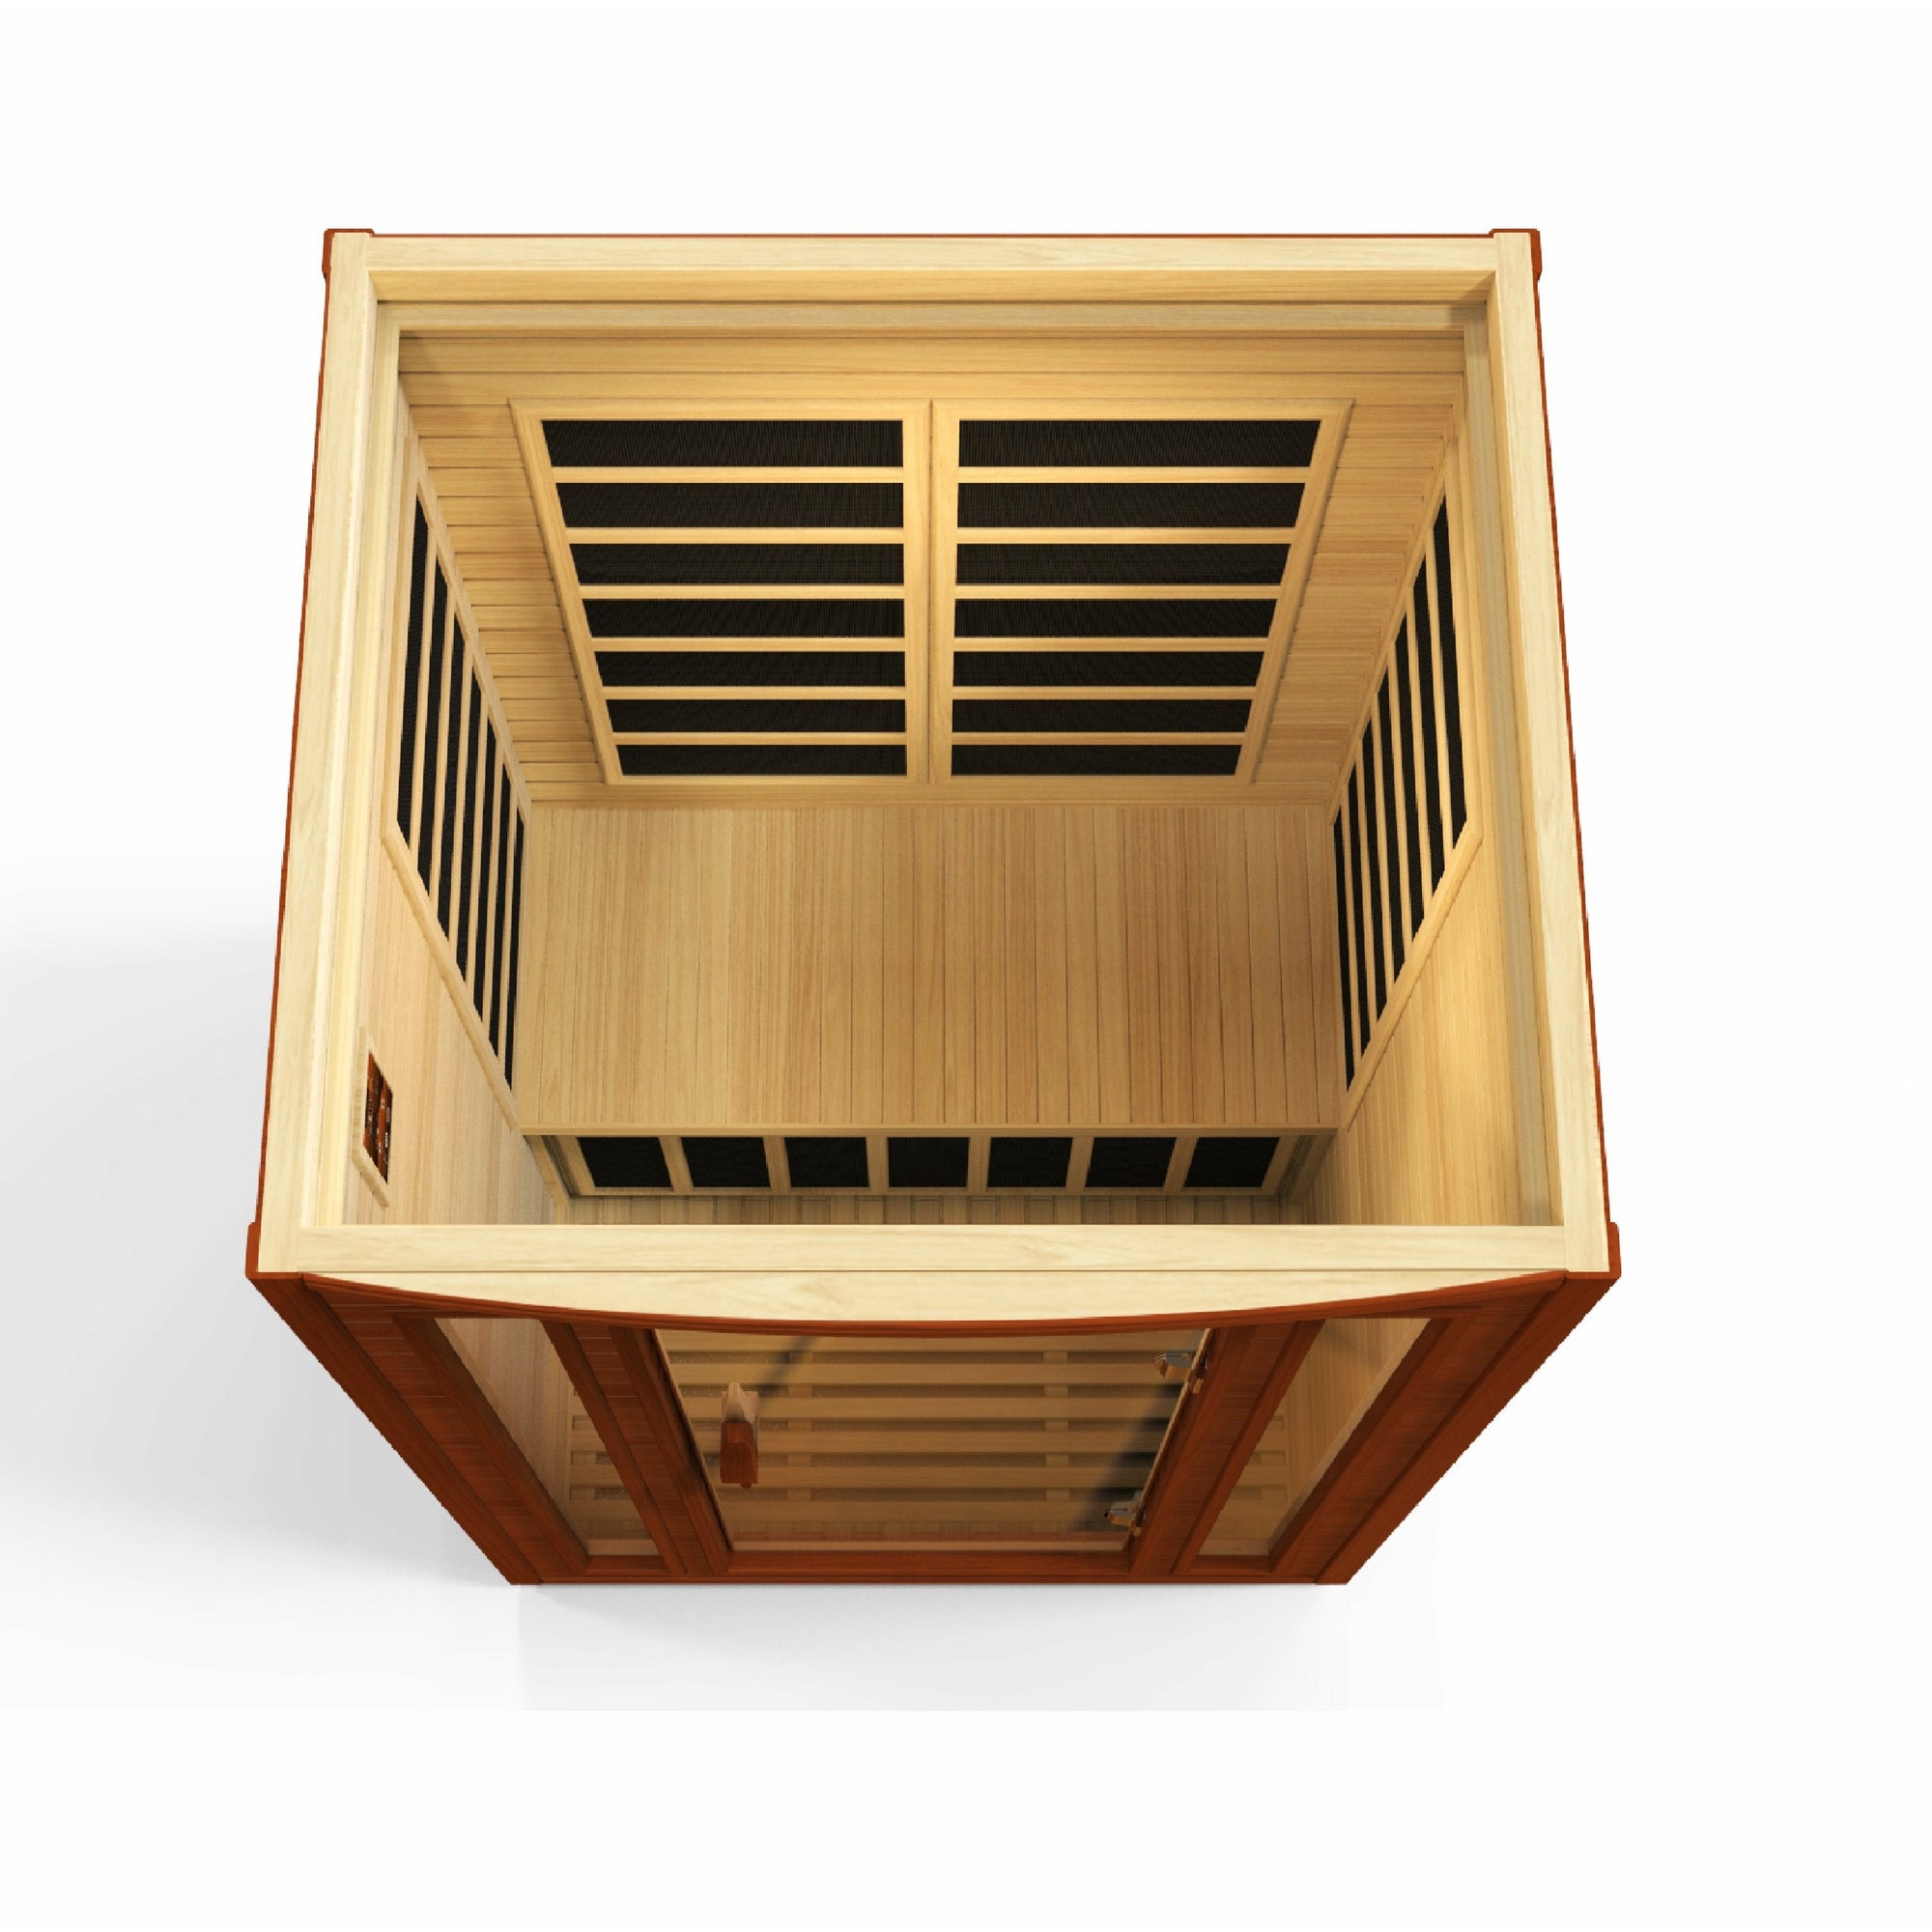 Dynamic San Marino Edition Low EMF Far Infrared Sauna - 2 Person Natural hemlock wood construction Roof vent with Tempered glass door and exterior LED control panel isometric view in white background  - Vital Hydrotherapy